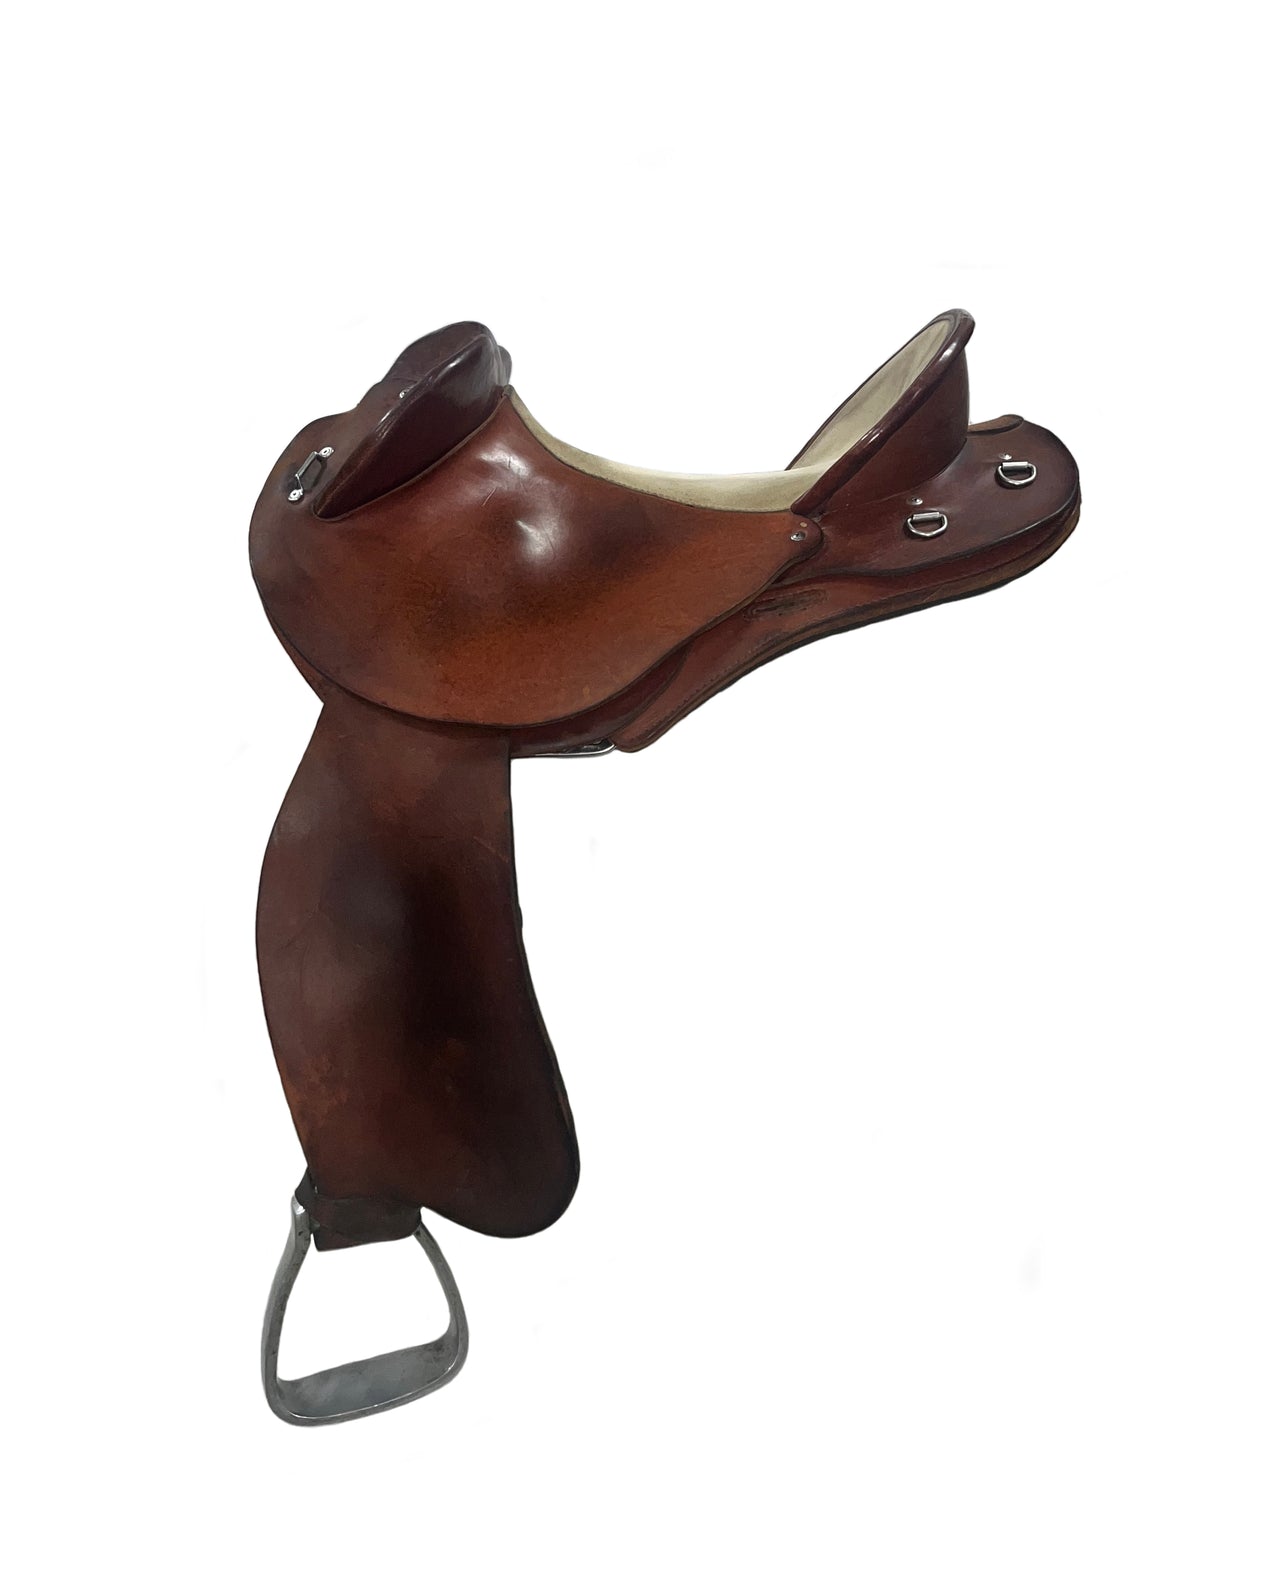 Cloncurry Fender Saddle 17 Inch Second Hand - The Trading Stables